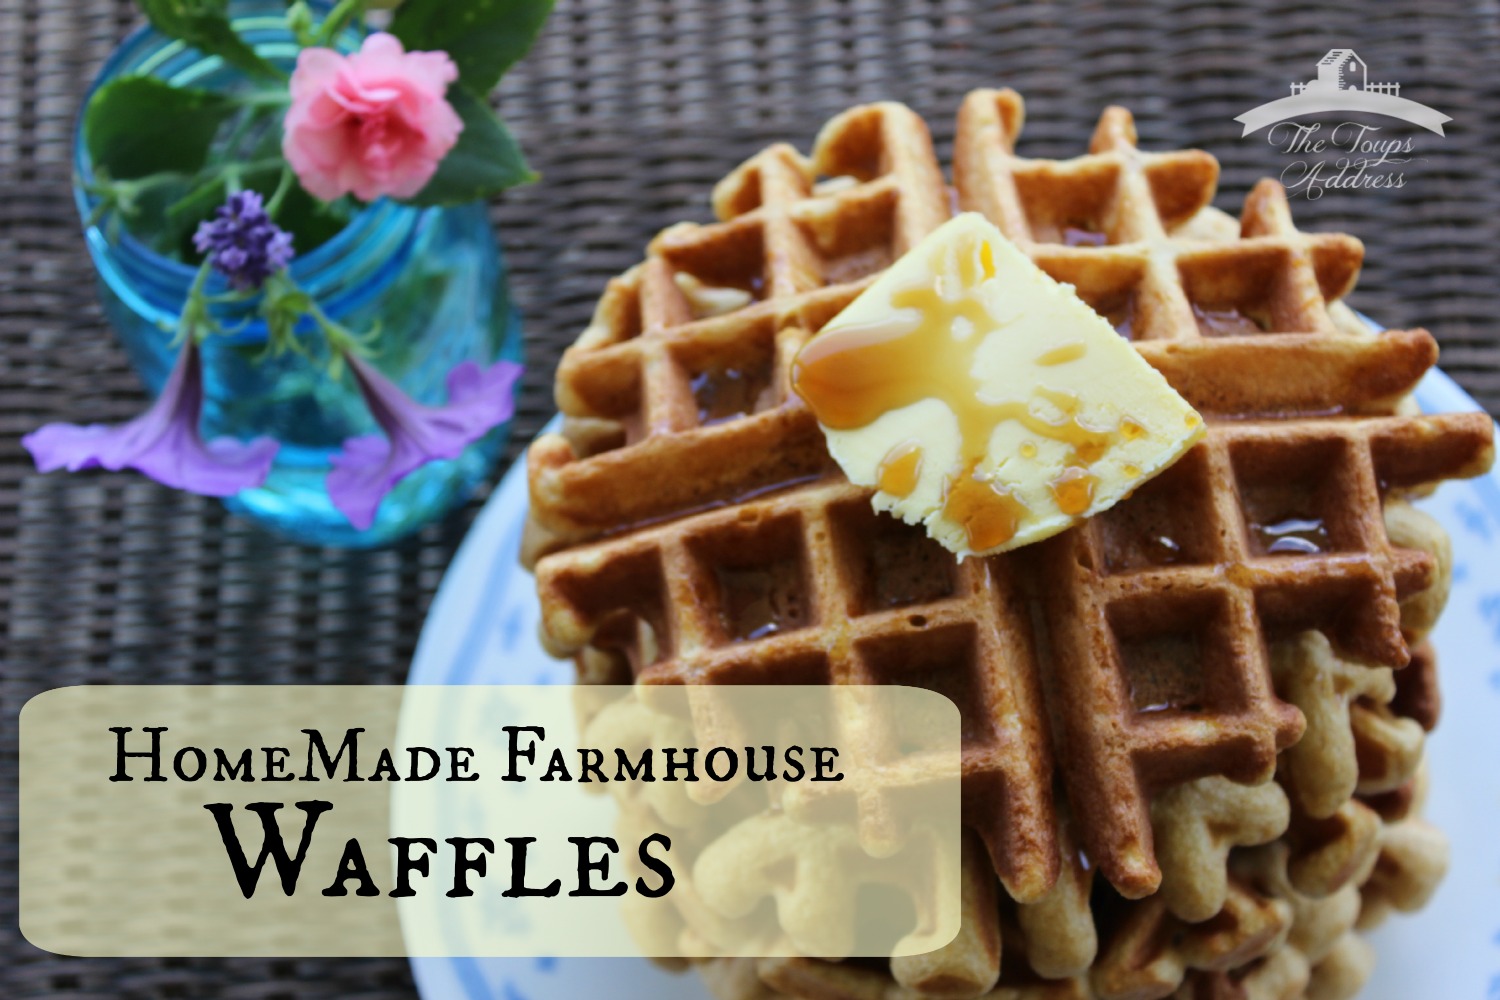 Homemade Farmhouse Waffles - freeze these babies up for a quick, healthy and easy breakfast!